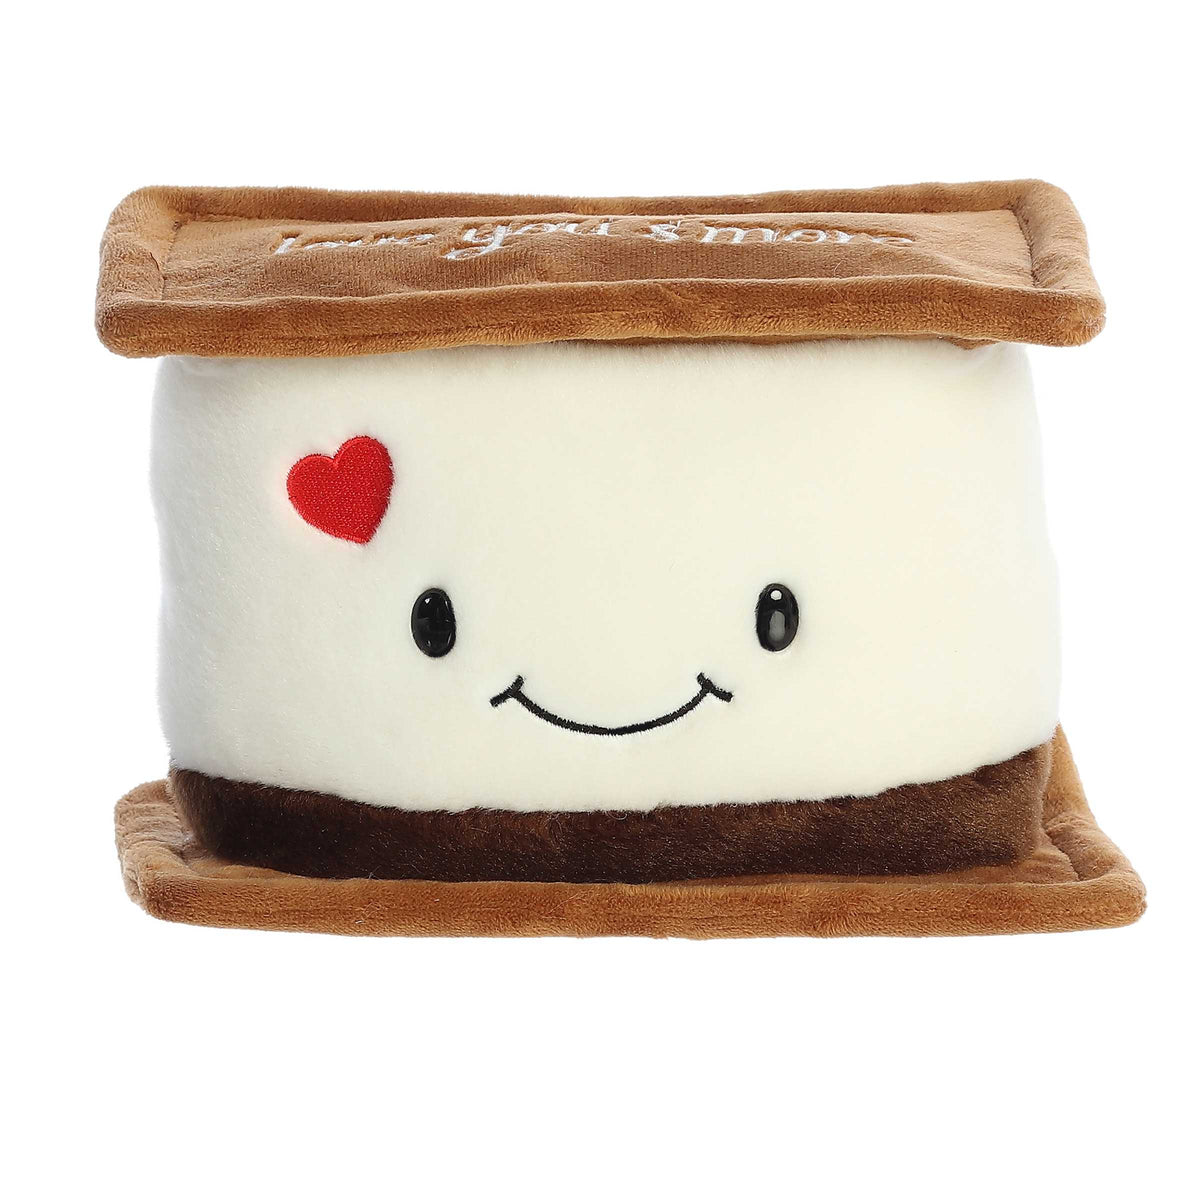 Plush s'more toy with graham crackers, chocolate, smiling marshmallow, and 'love you s'more' message from Aurora plush